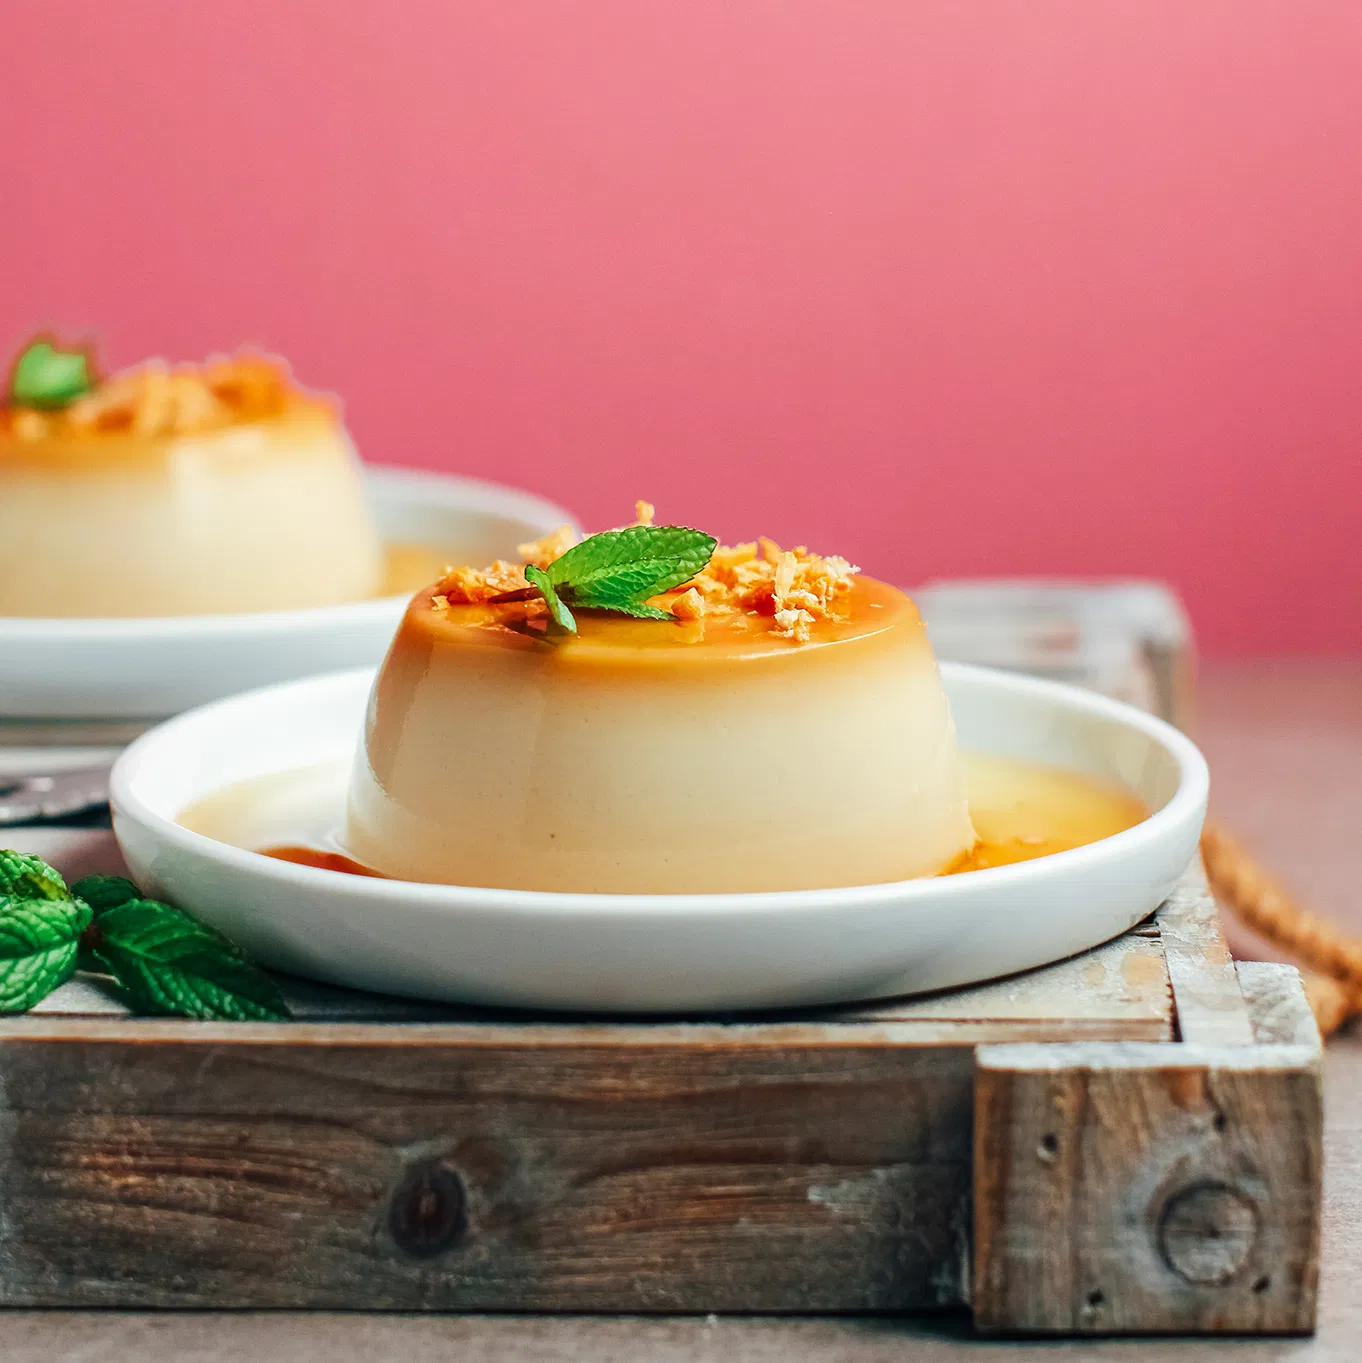 How to Make this Easy Vegan Flan?